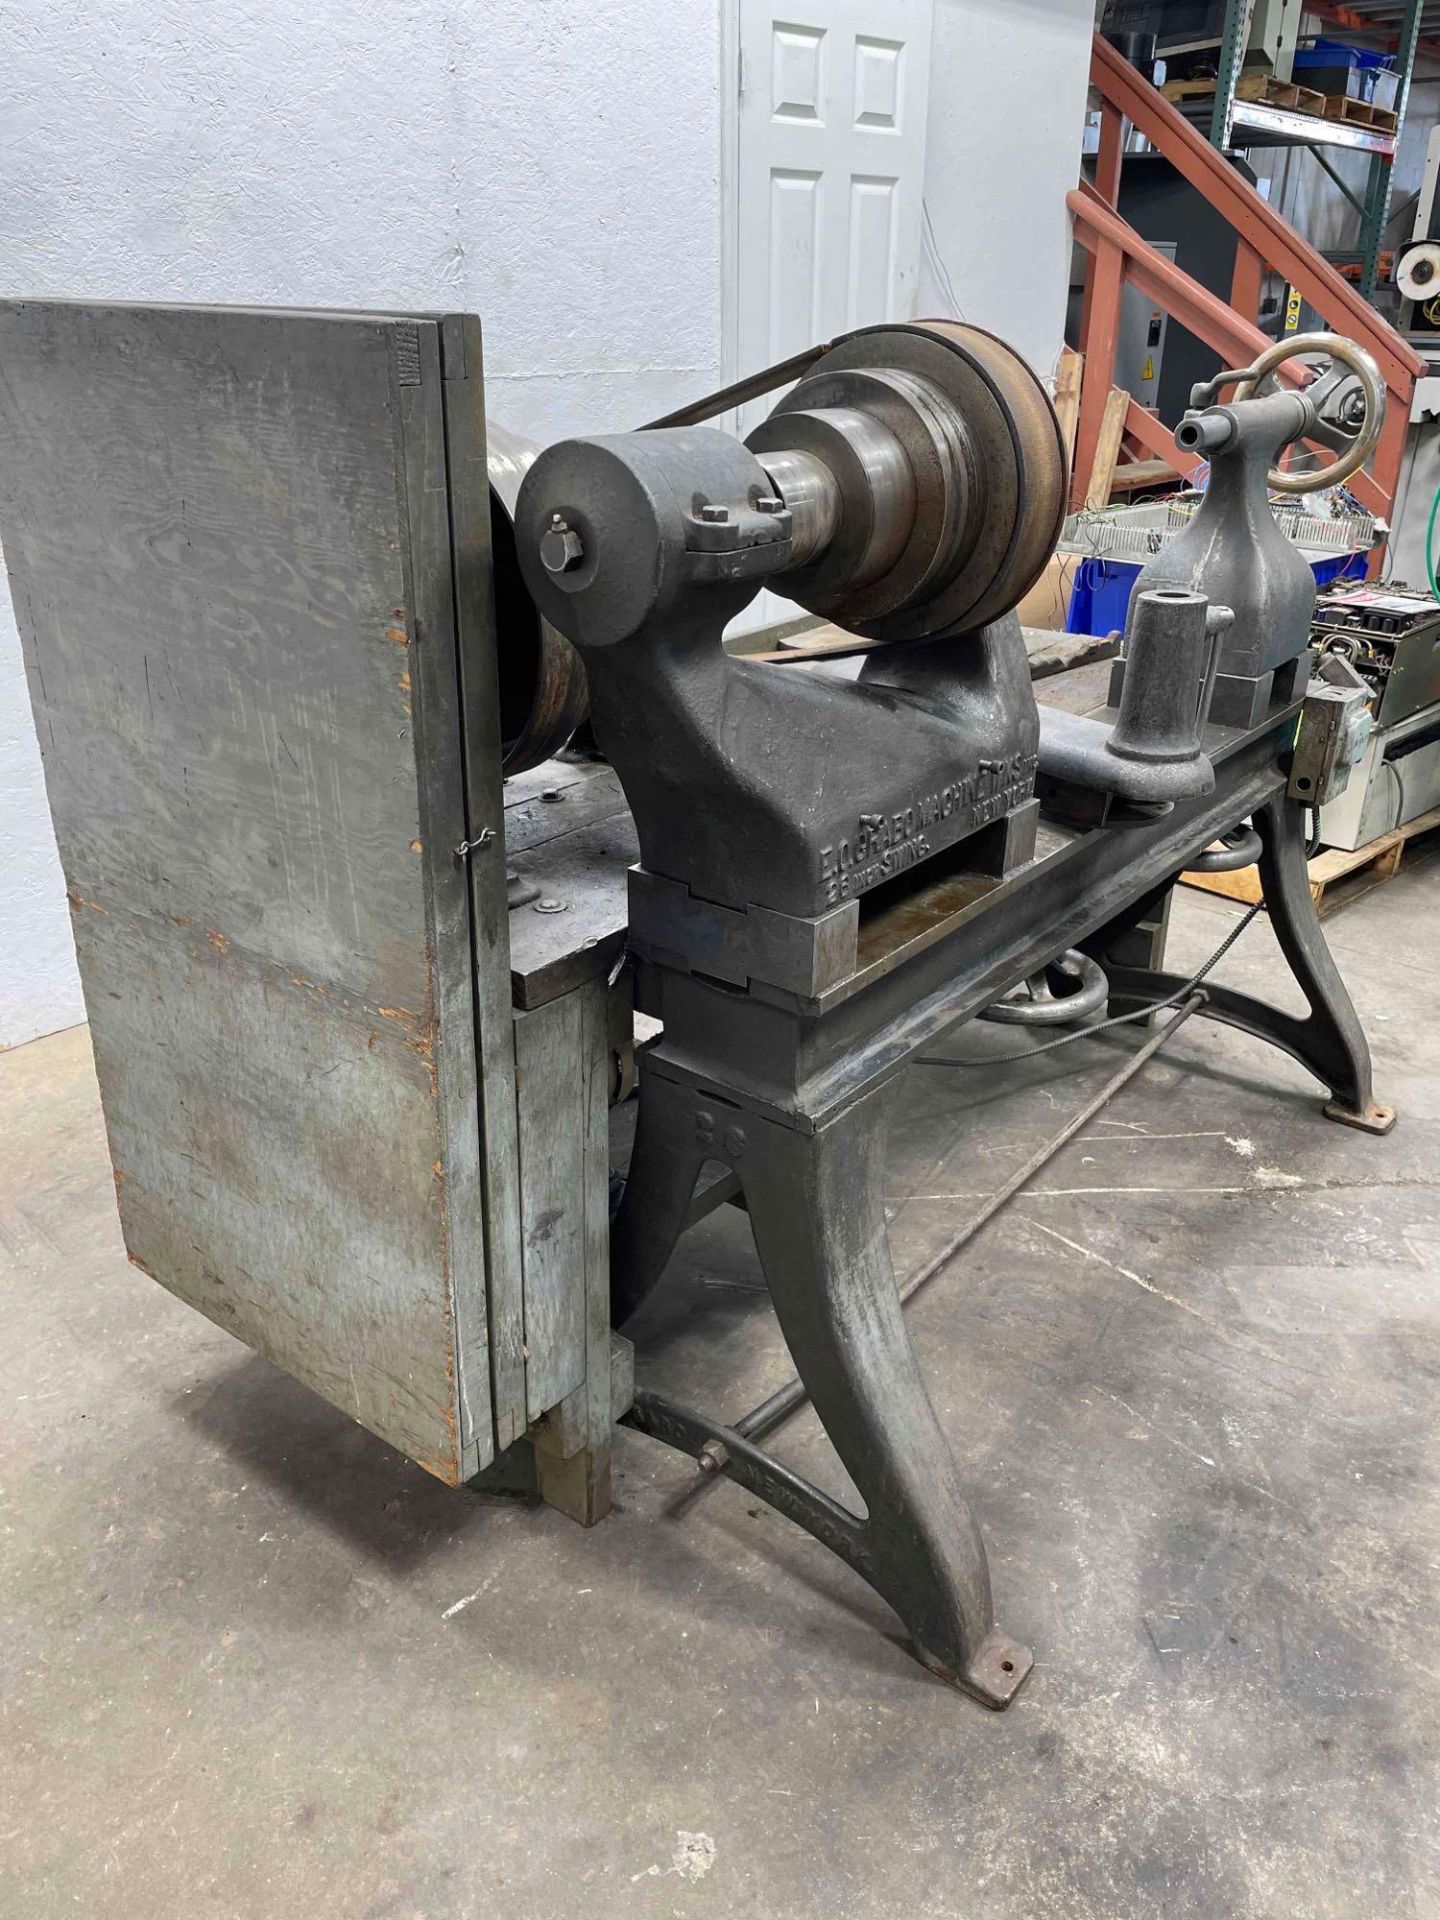 E.O.Grabo Machine Wks Spinning Lathe, 26 in Swing, 24" Between Centers, 1.5 HP, 1 Phase, 208V   $50 - Image 5 of 19